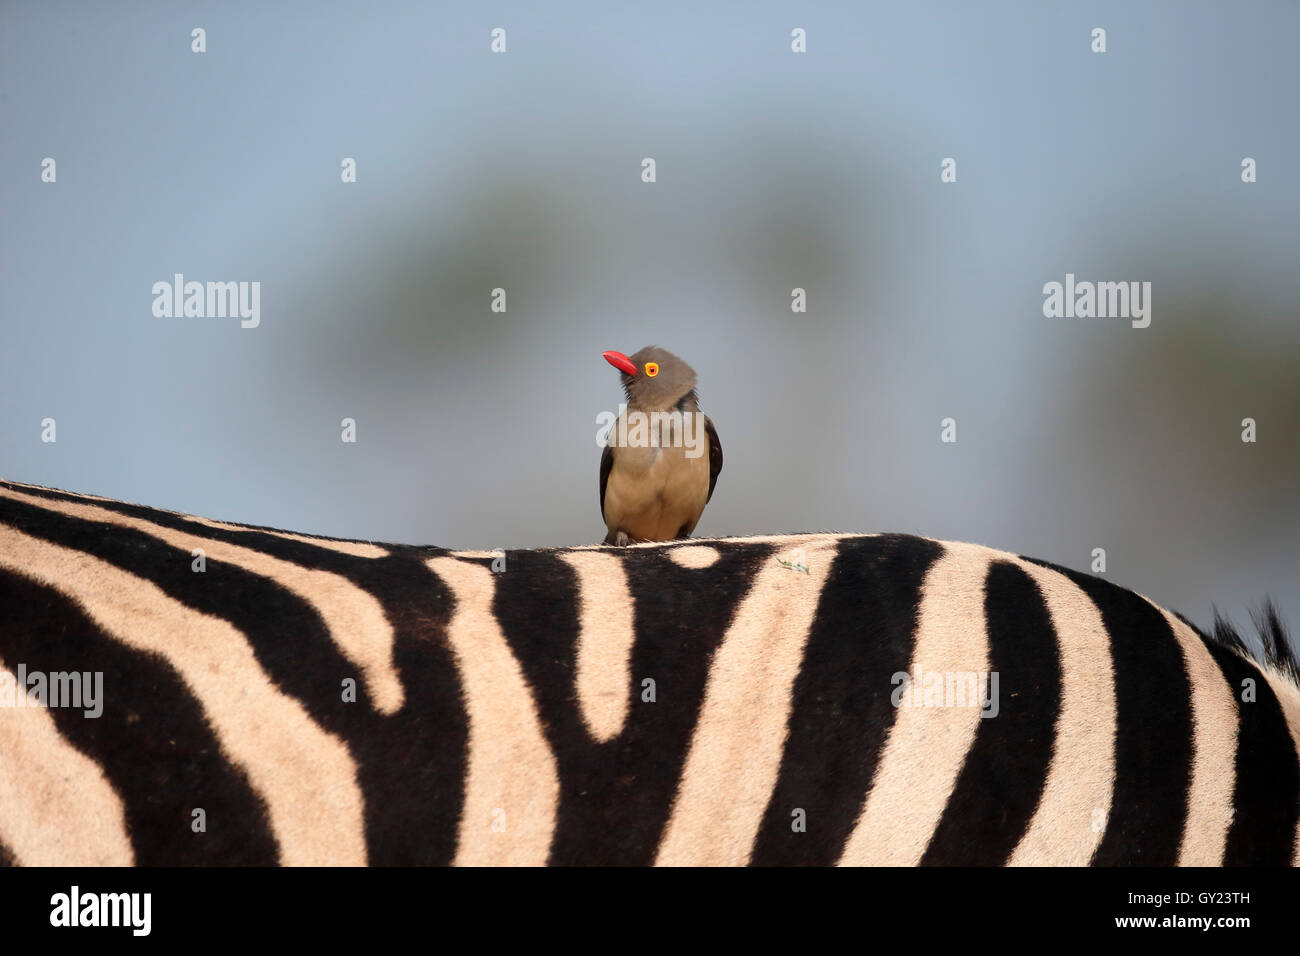 Red-billed oxpecker, Buphagus erythrorhynchus, single bird on zebra, South Africa, August 2016 Stock Photo